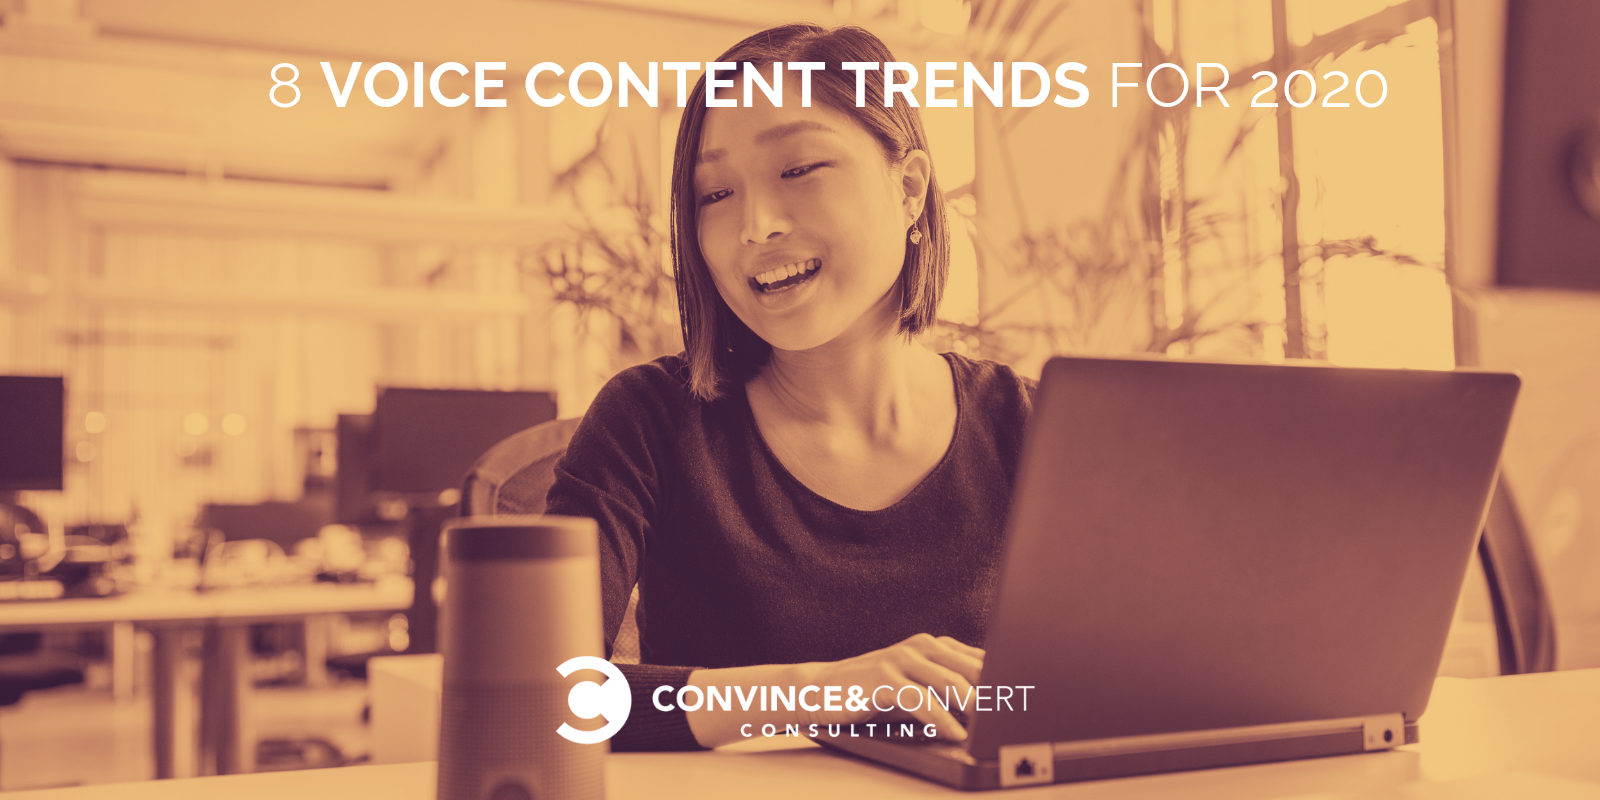 , 8 Voice Content Trends for 2020, 